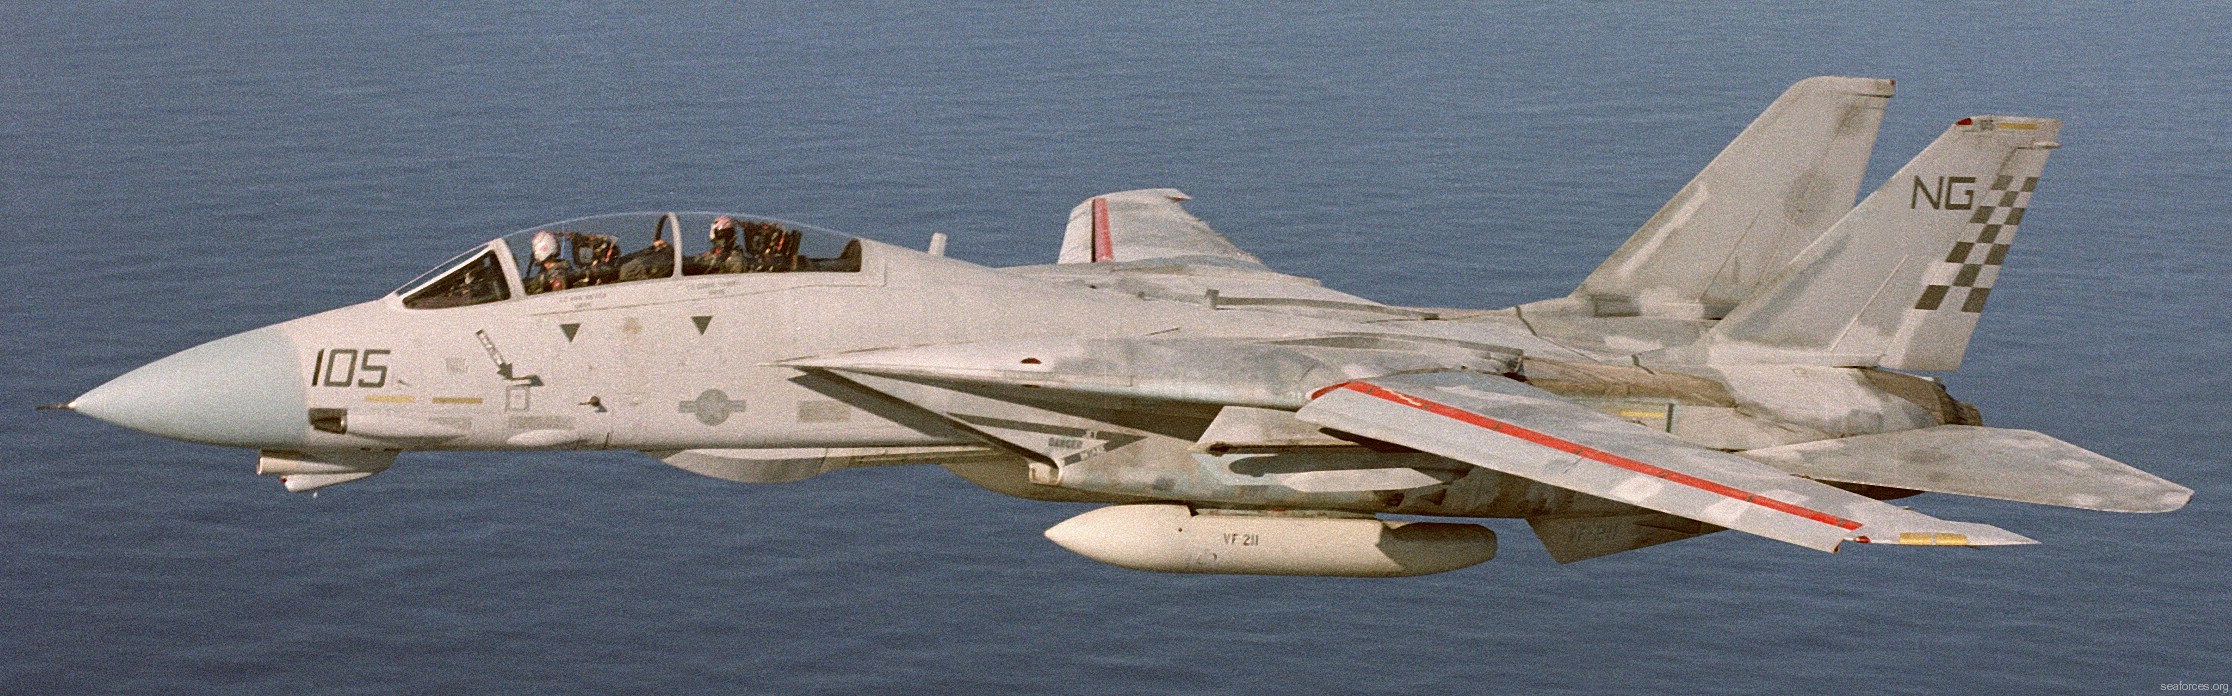 vf-211 fighting checkmates fighter squadron f-14a tomcat us navy carrier air wing cvw-9 uss kitty hawk cv-63 80